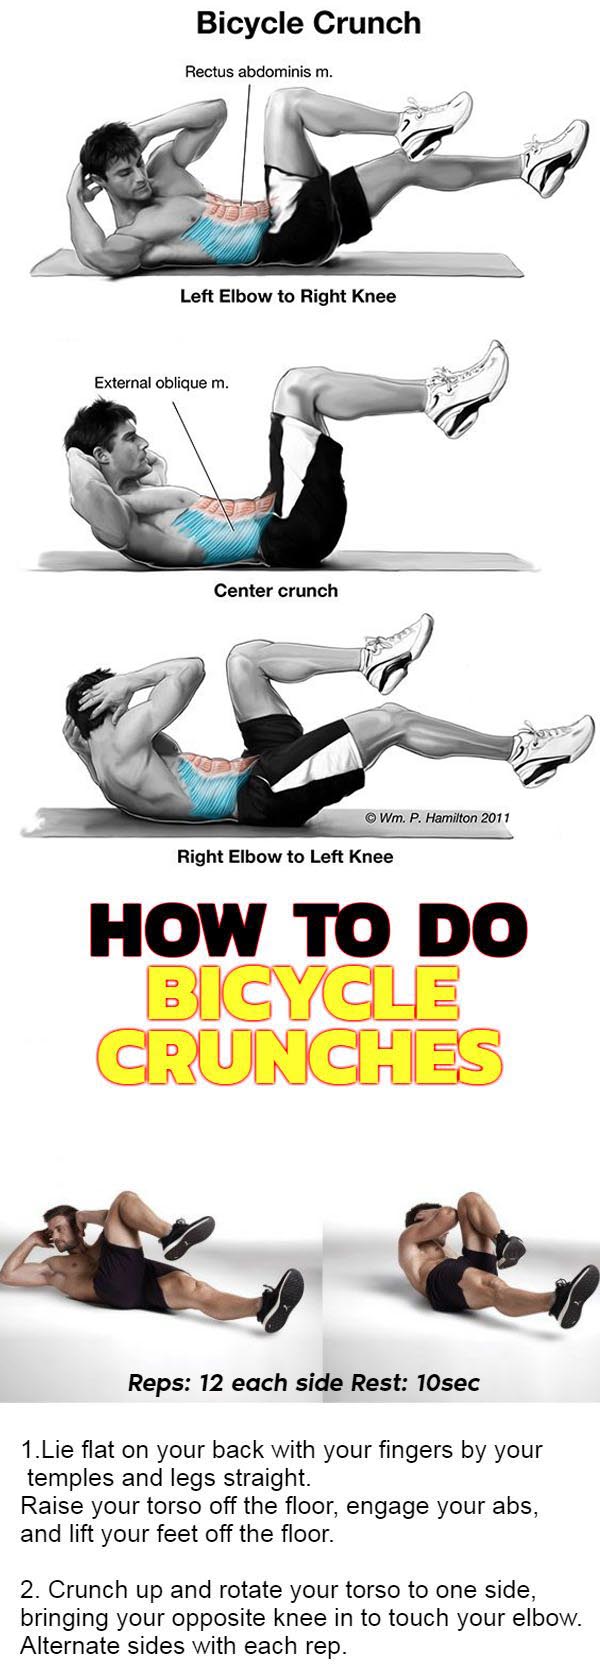 BICYCLE CRUNCH